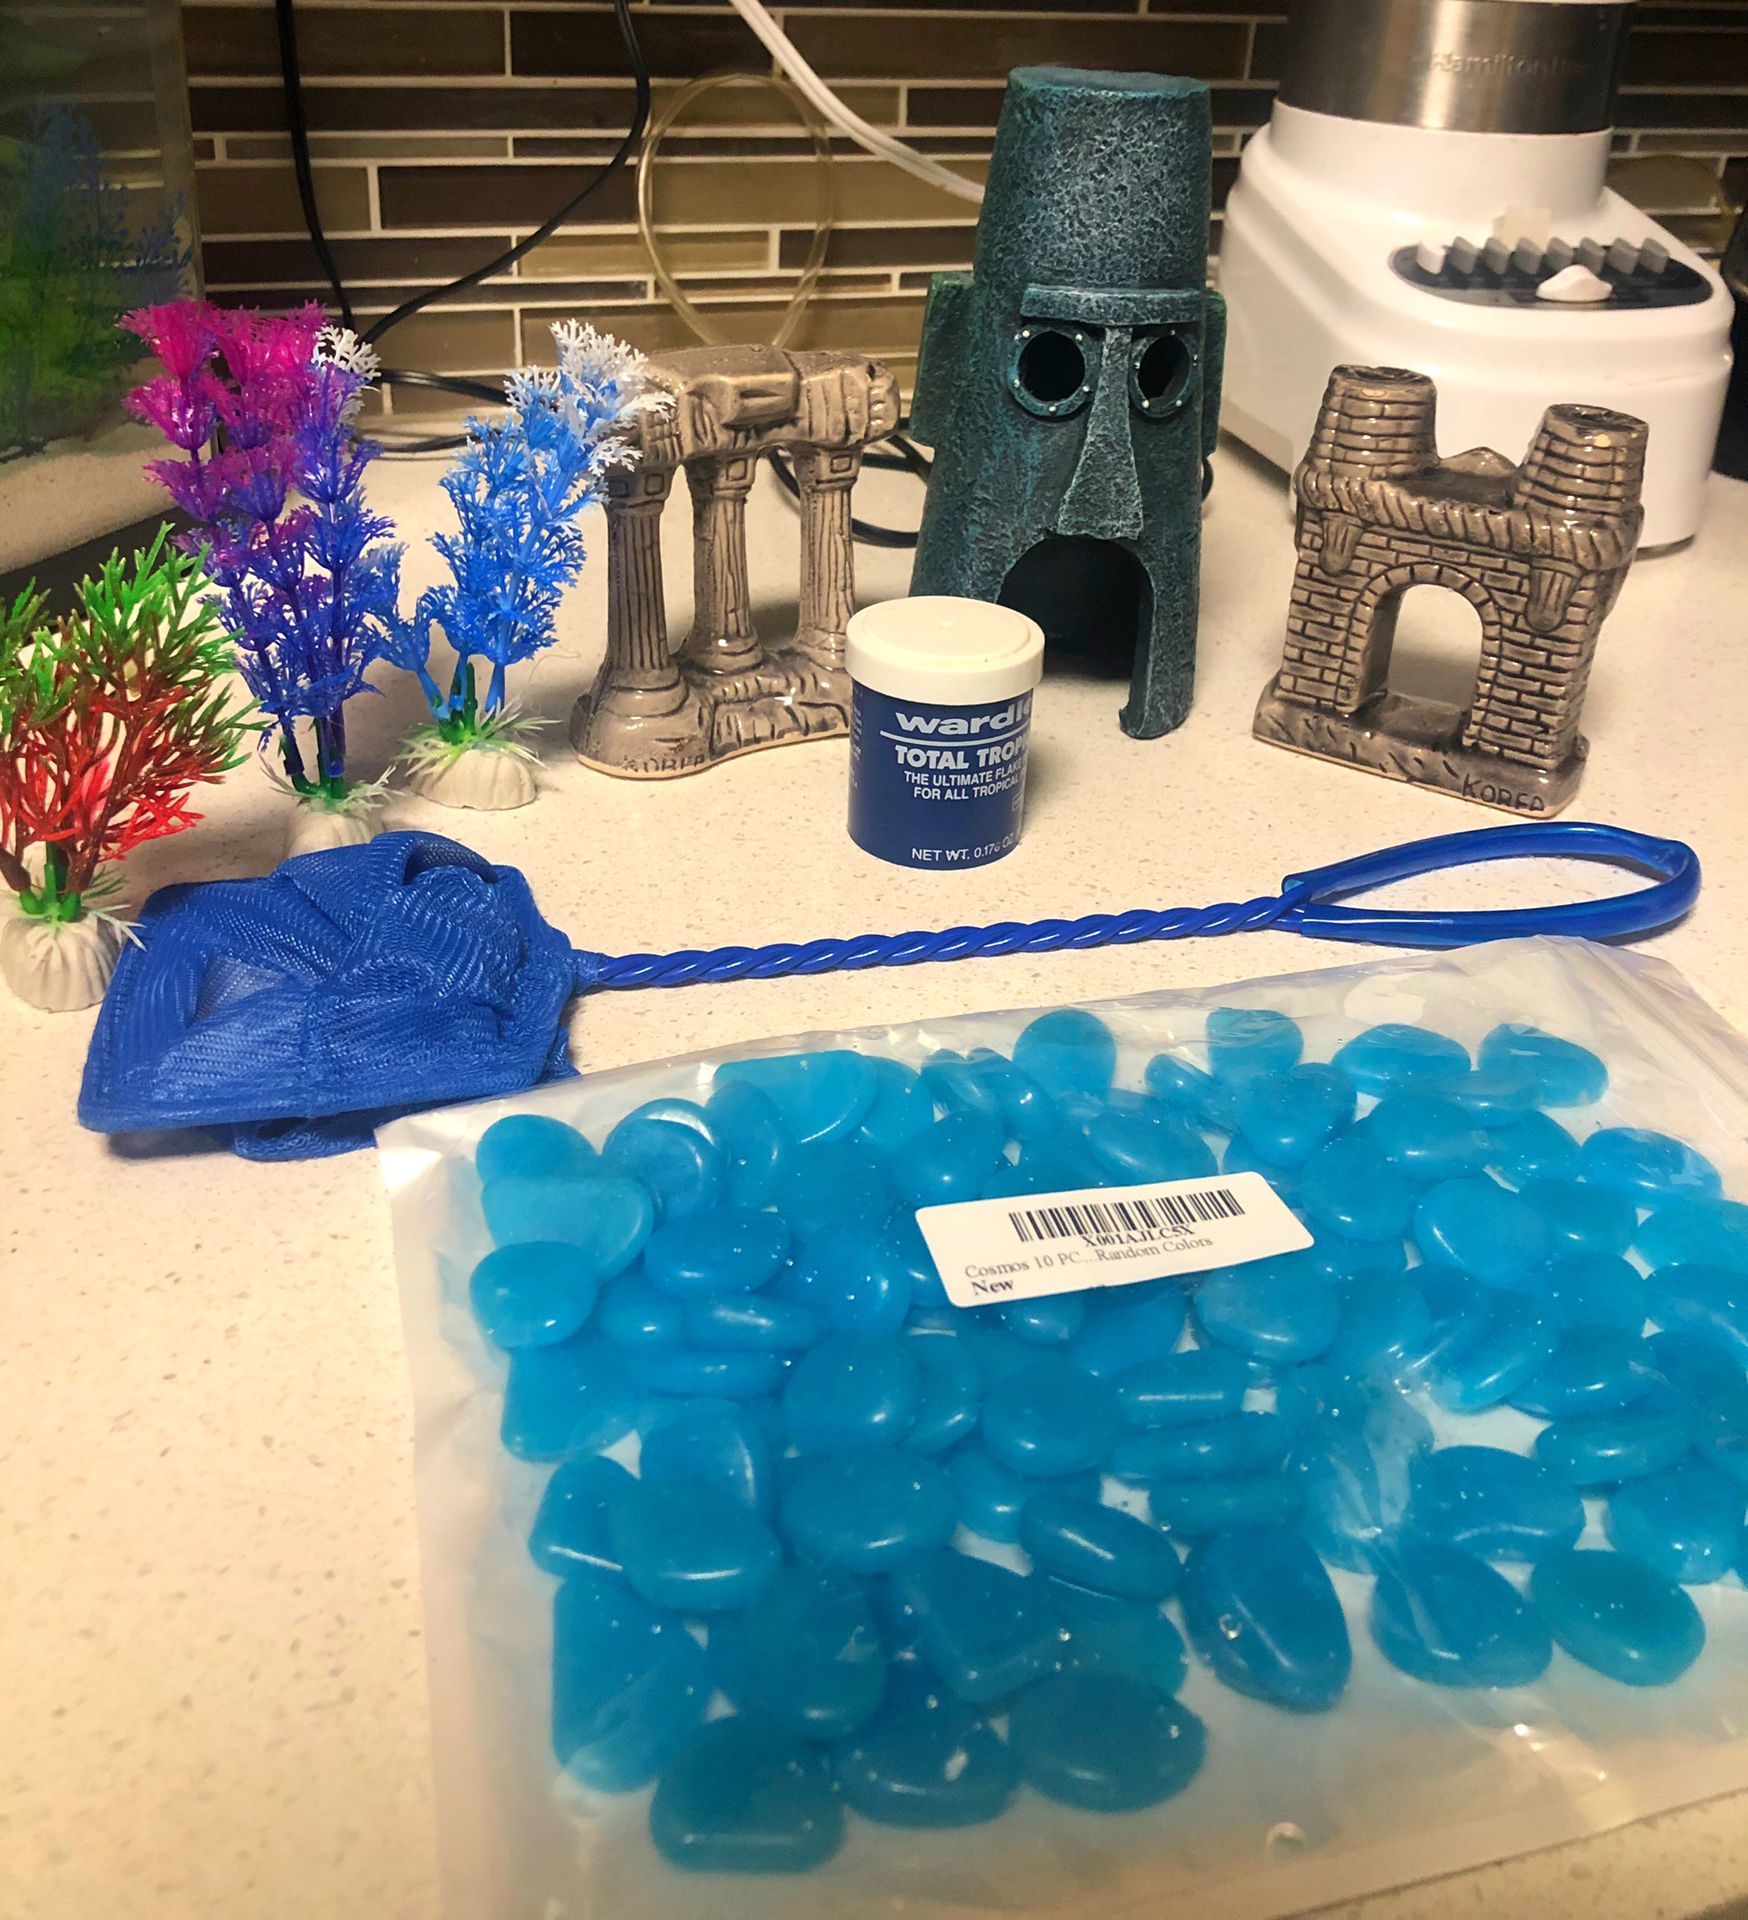 Fish tank decorations / glow rocks and more